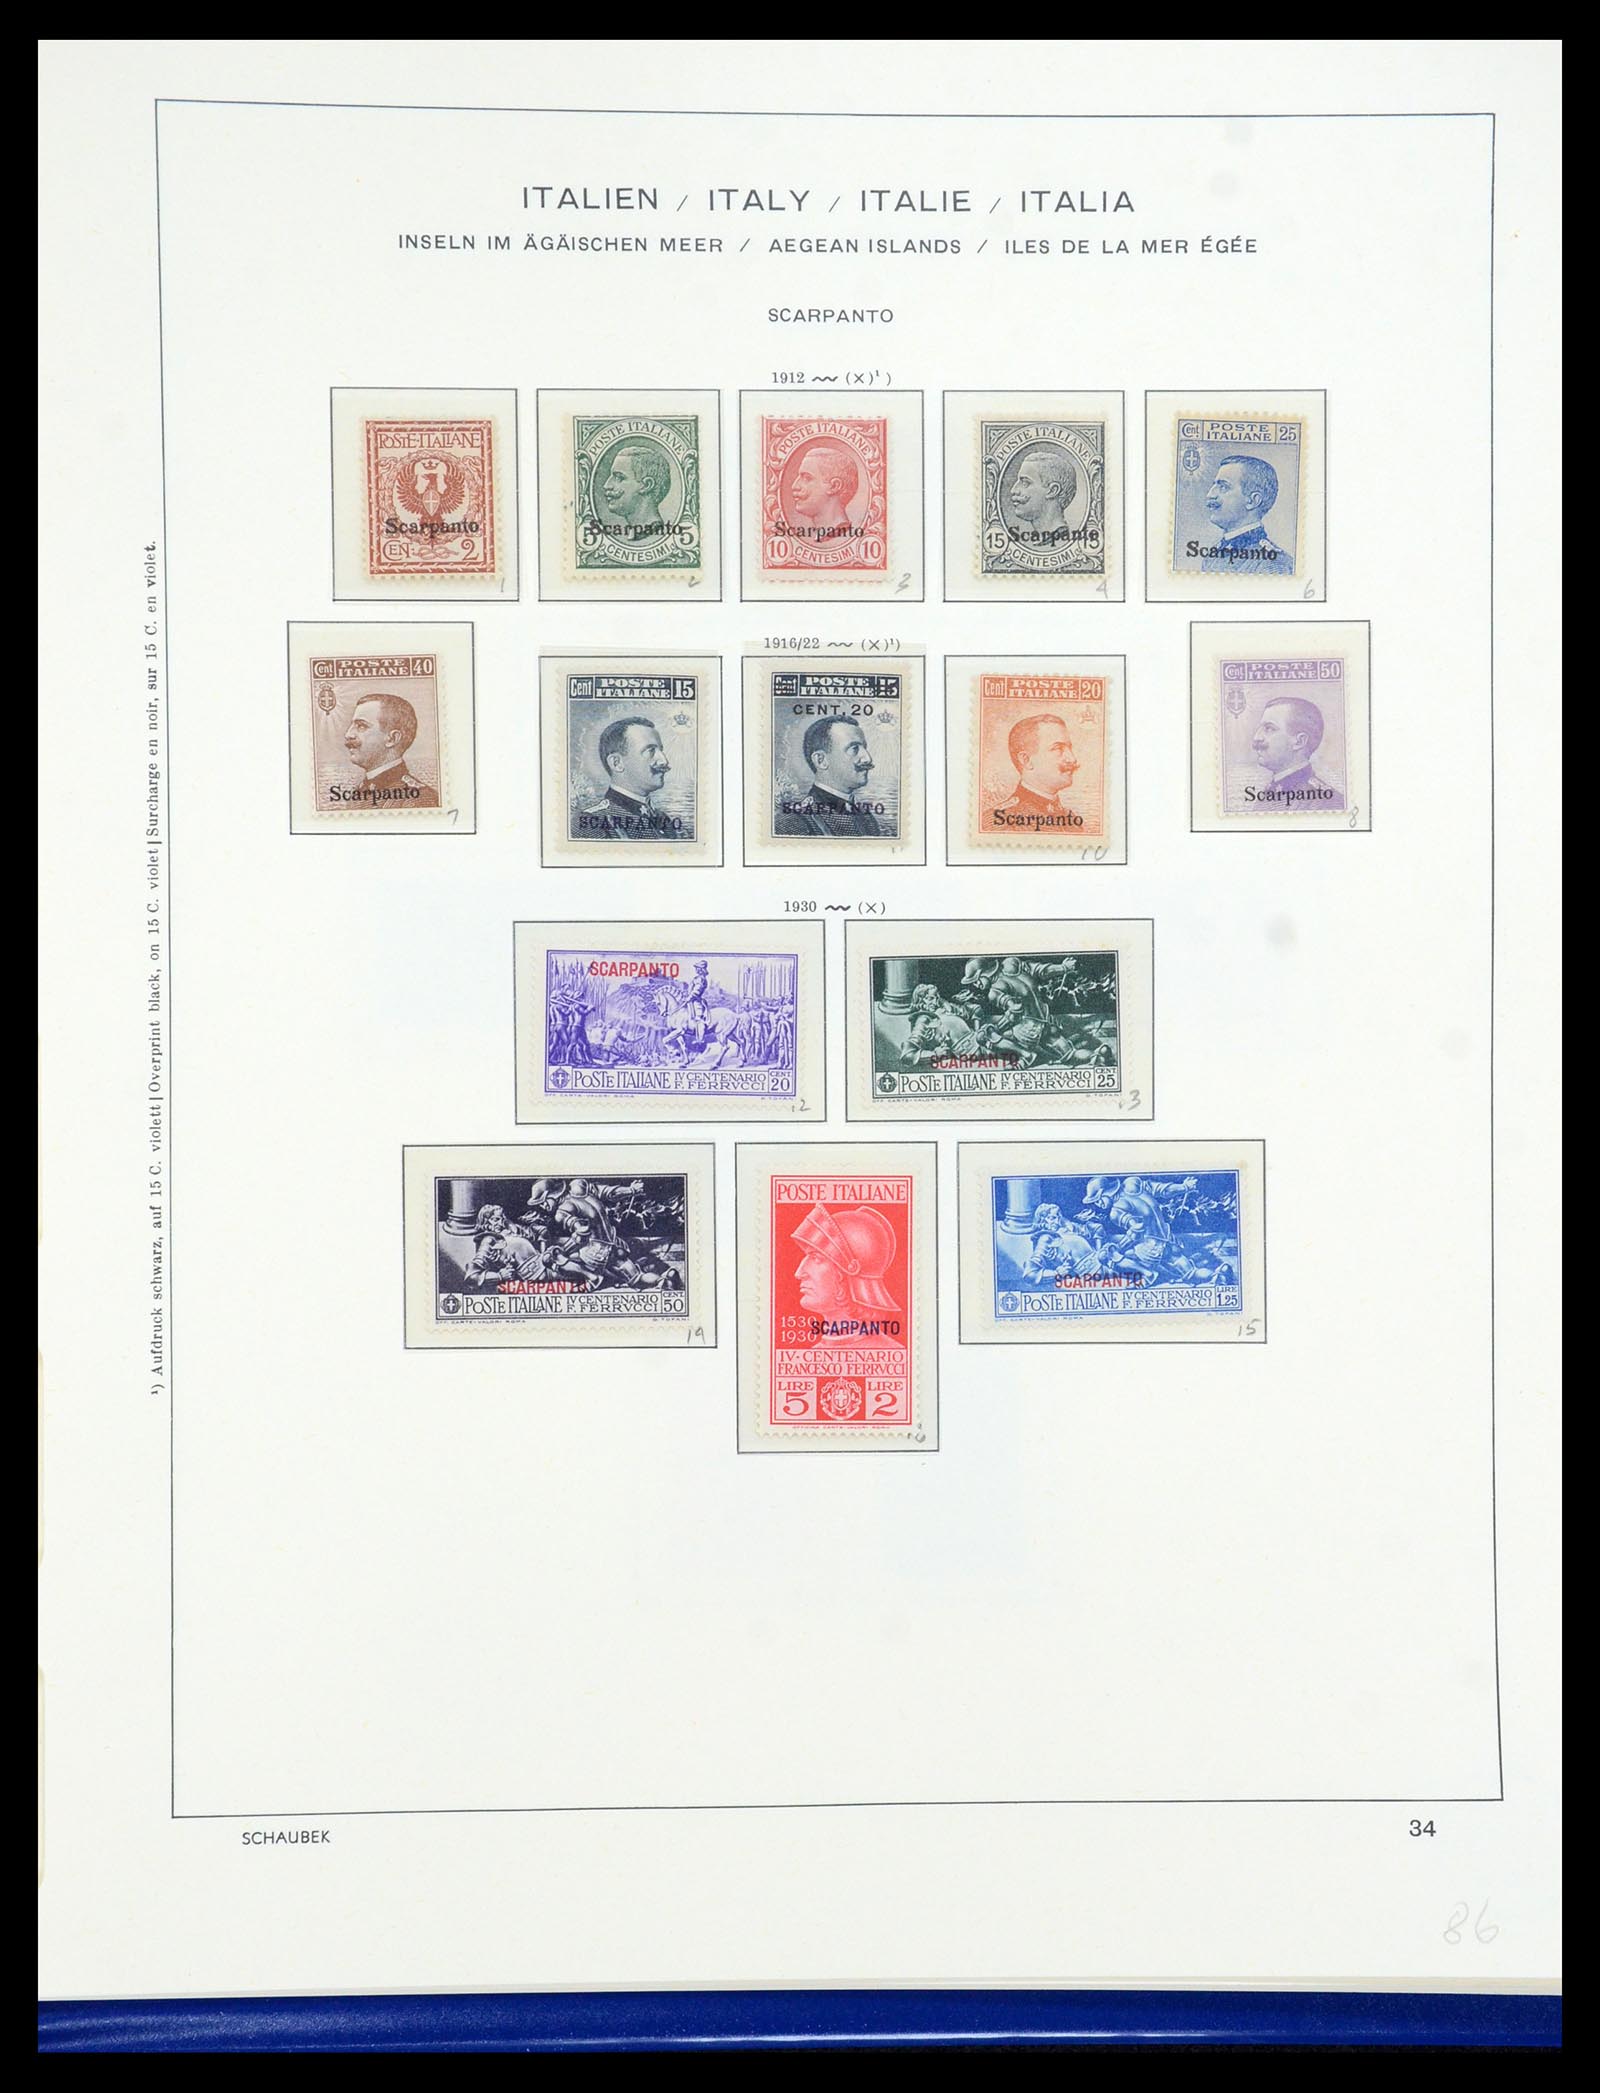 36181 049 - Stamp collection 36181 Italian Aegean Islands 1912-1941.